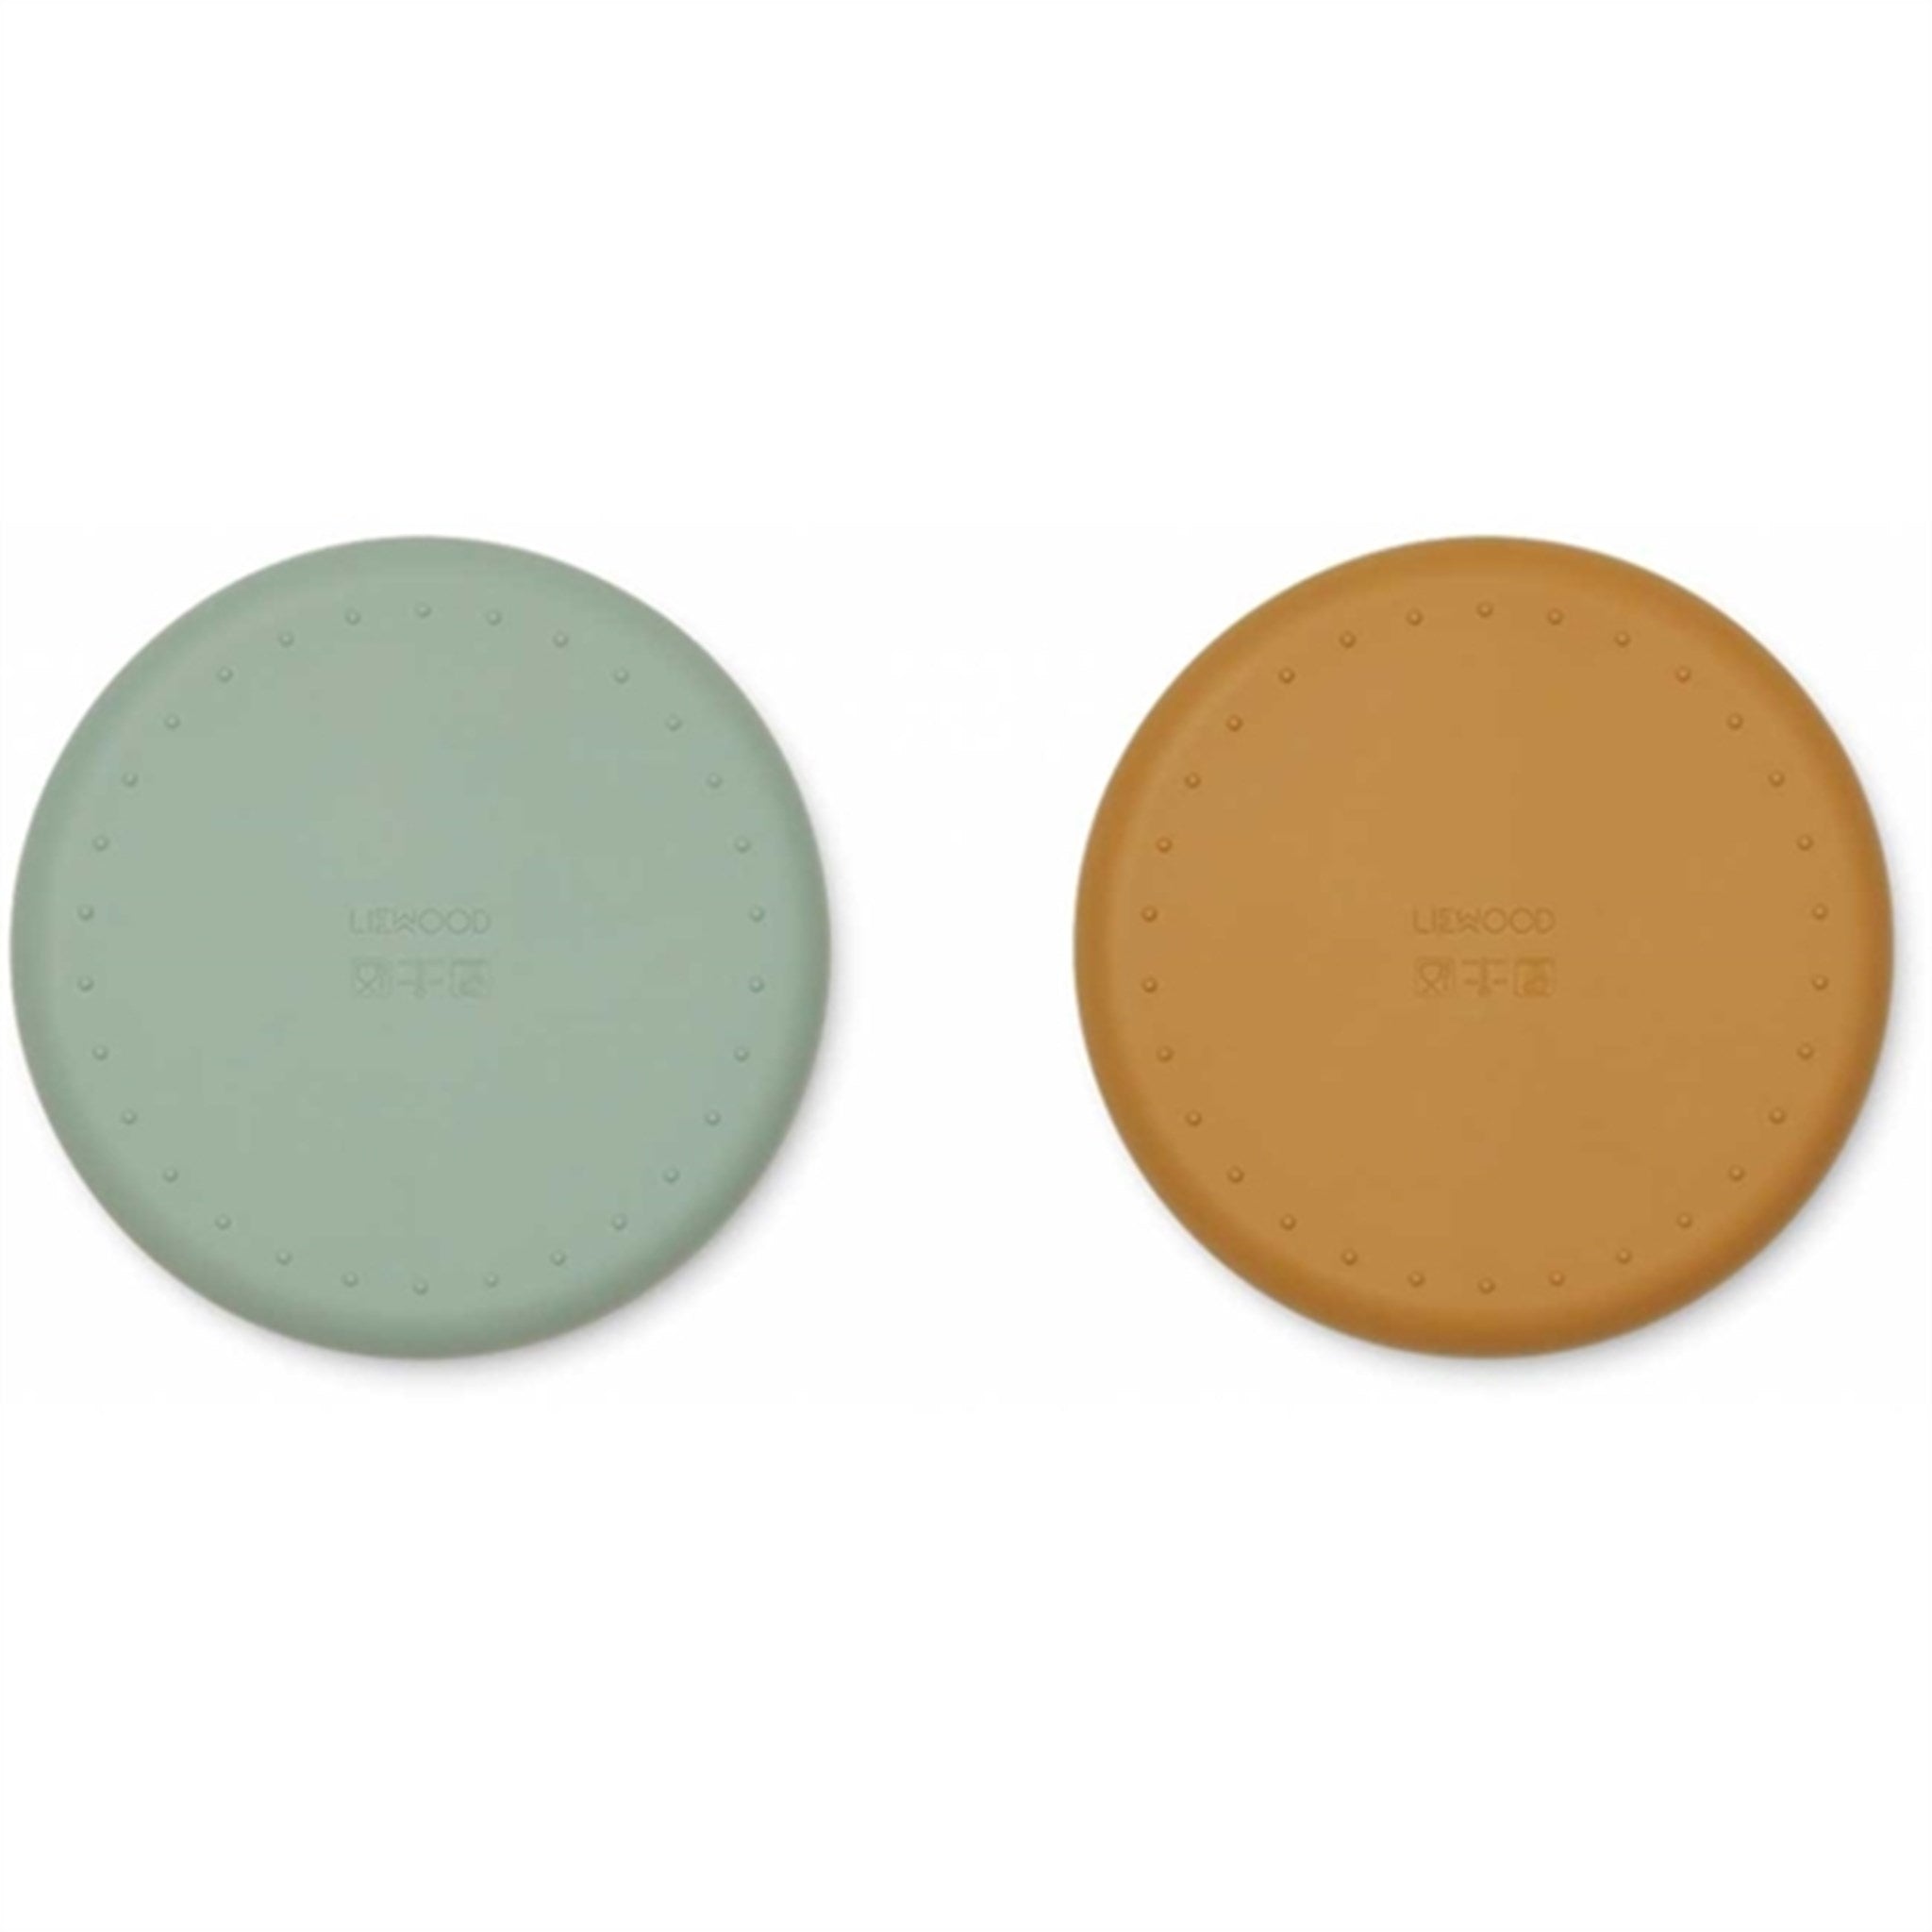 Liewood Harvey Silicone Divider Plate 2-pack Peppermint/Golden Caramel 2